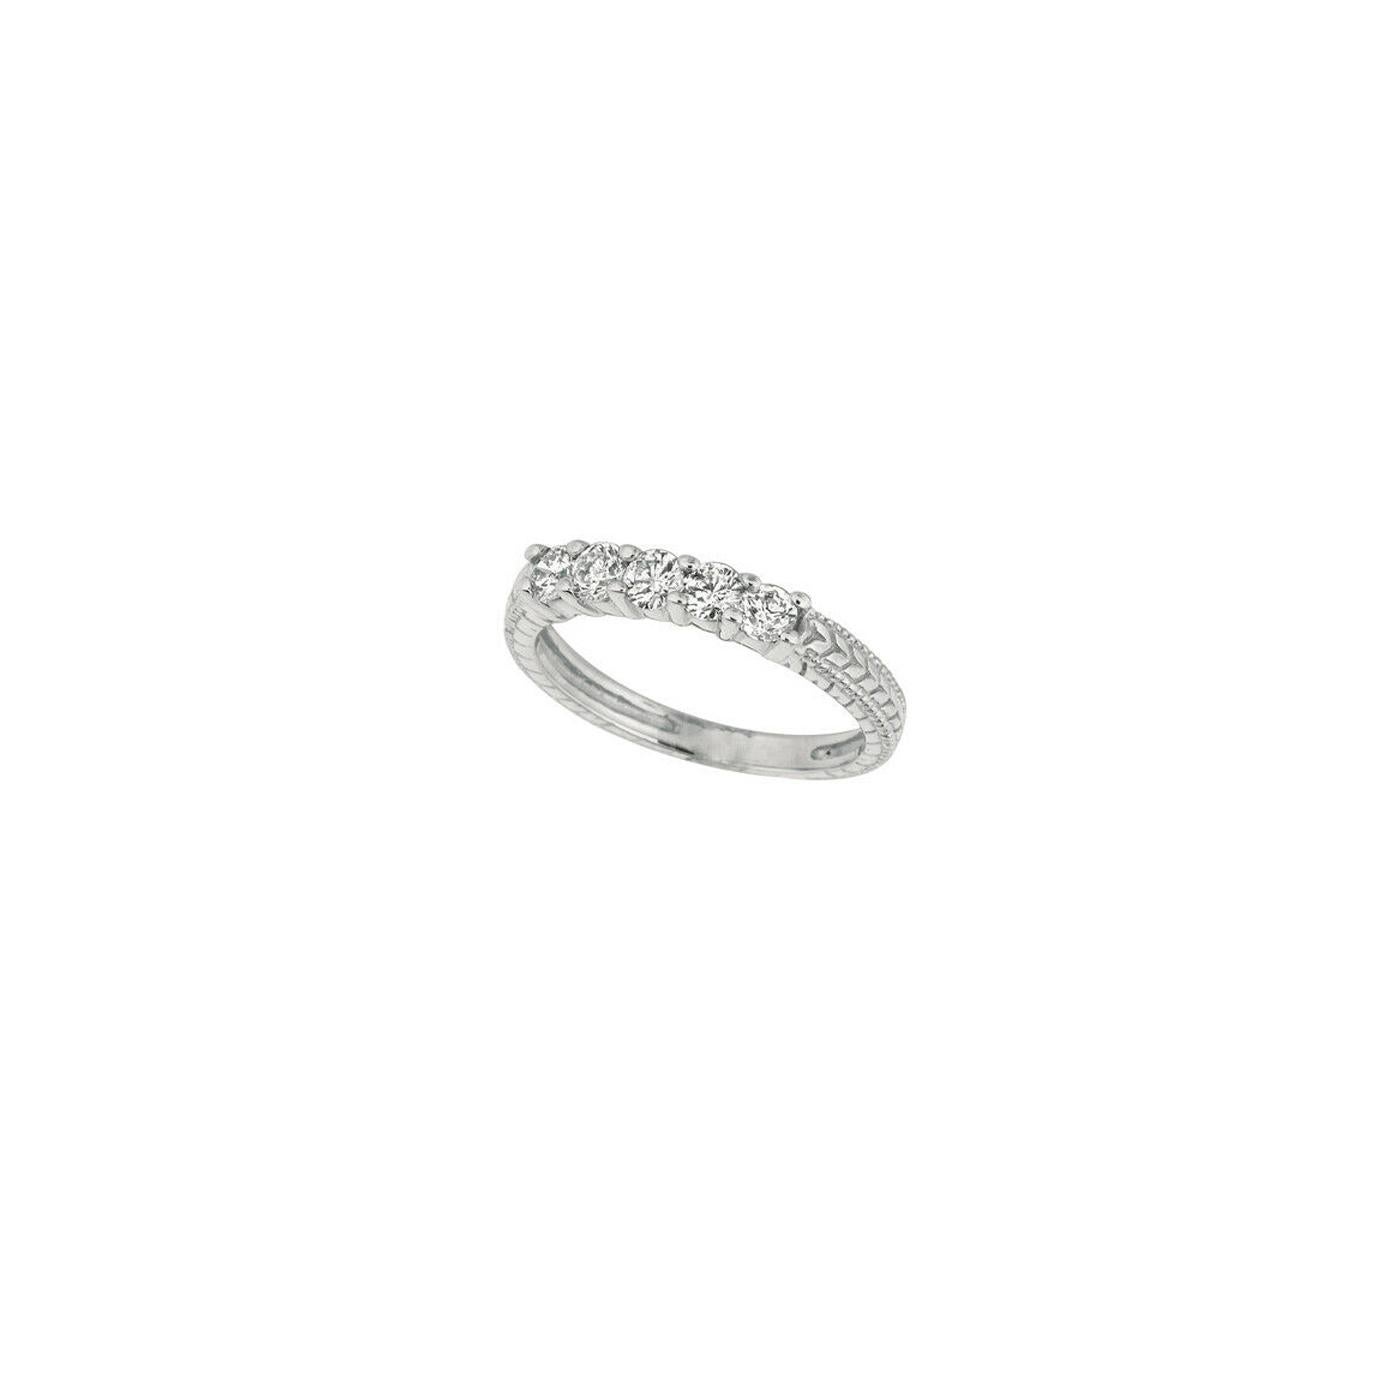 For Sale:  1.00 Carat Natural 5 Stone Diamond Ring Band 14K White Gold 4